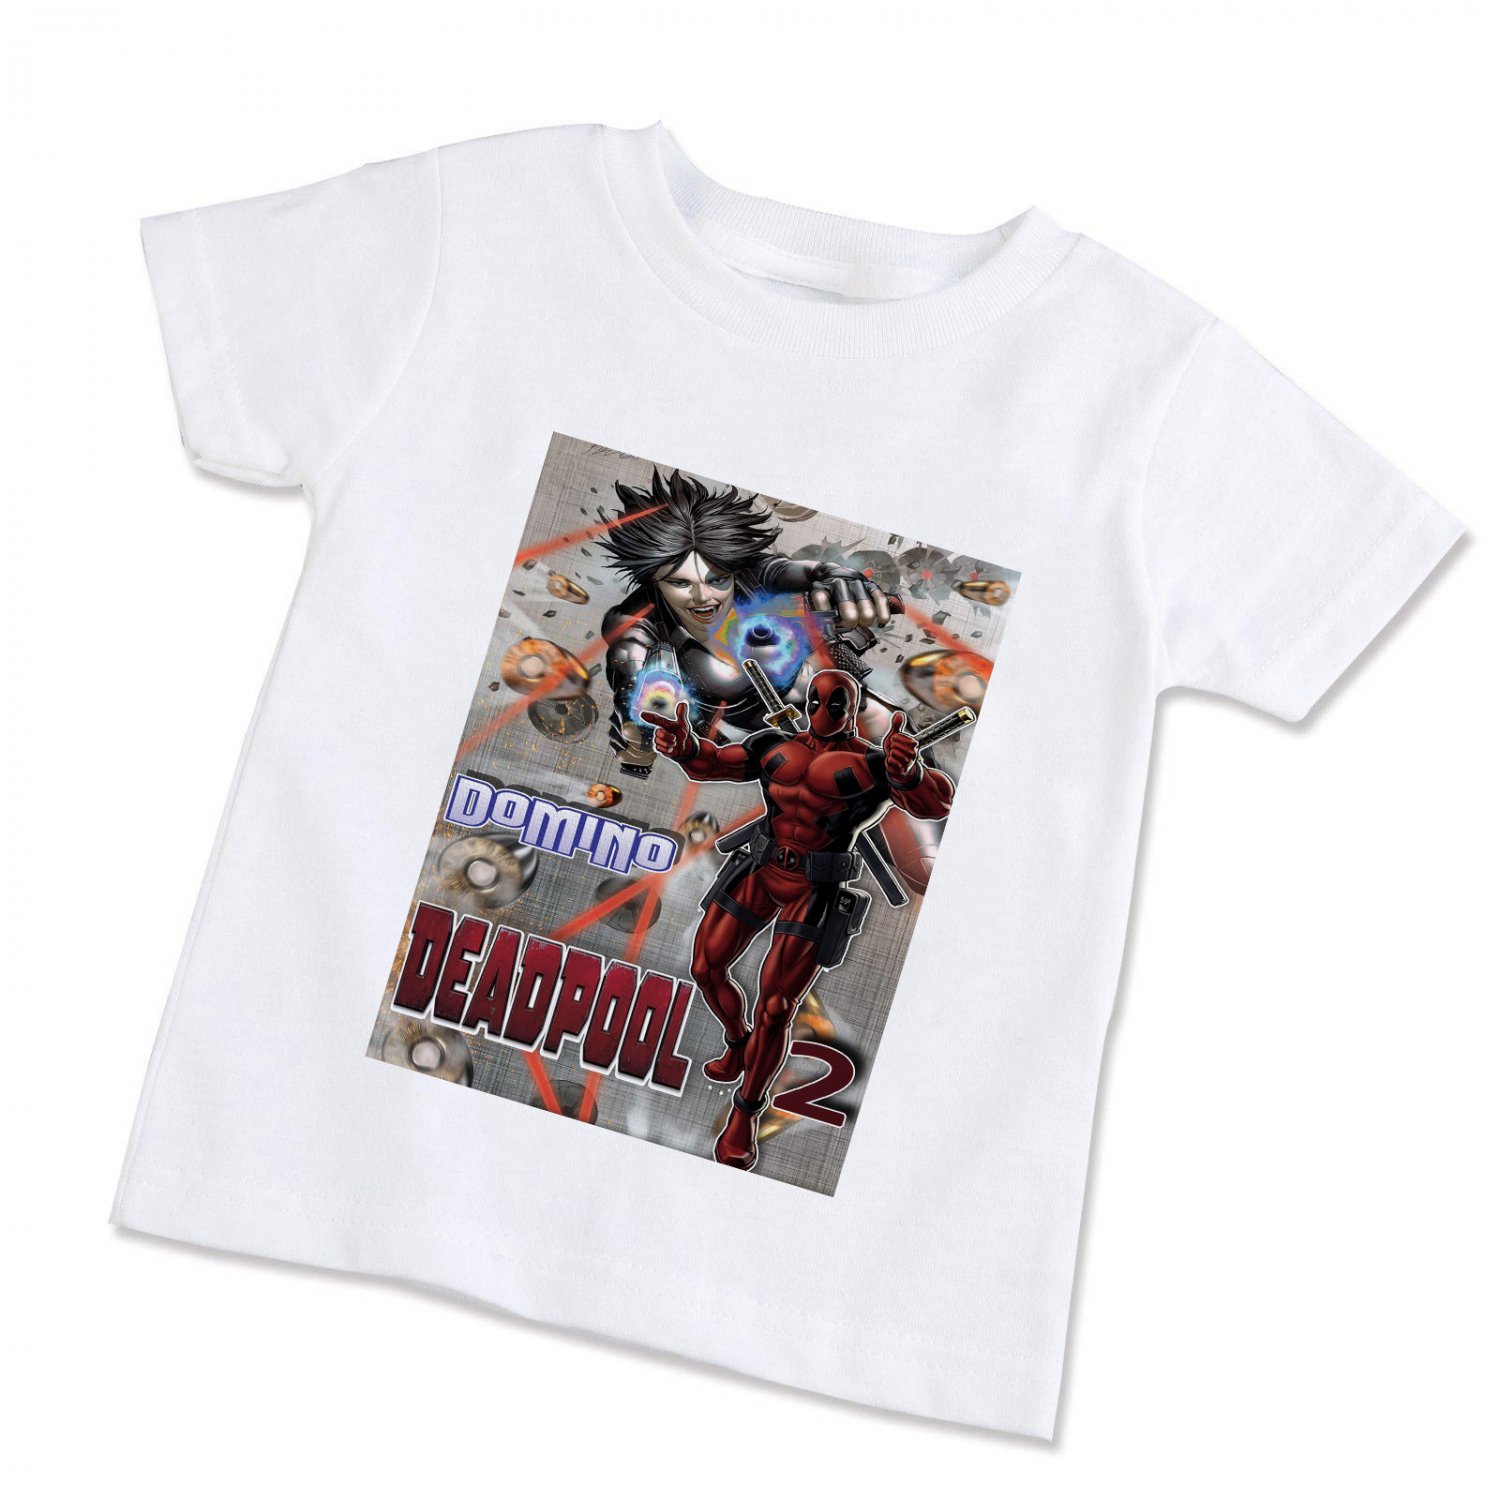 Deadpool 2 Movie  Unisex Children T-Shirt (Available in XS/S/M/L)